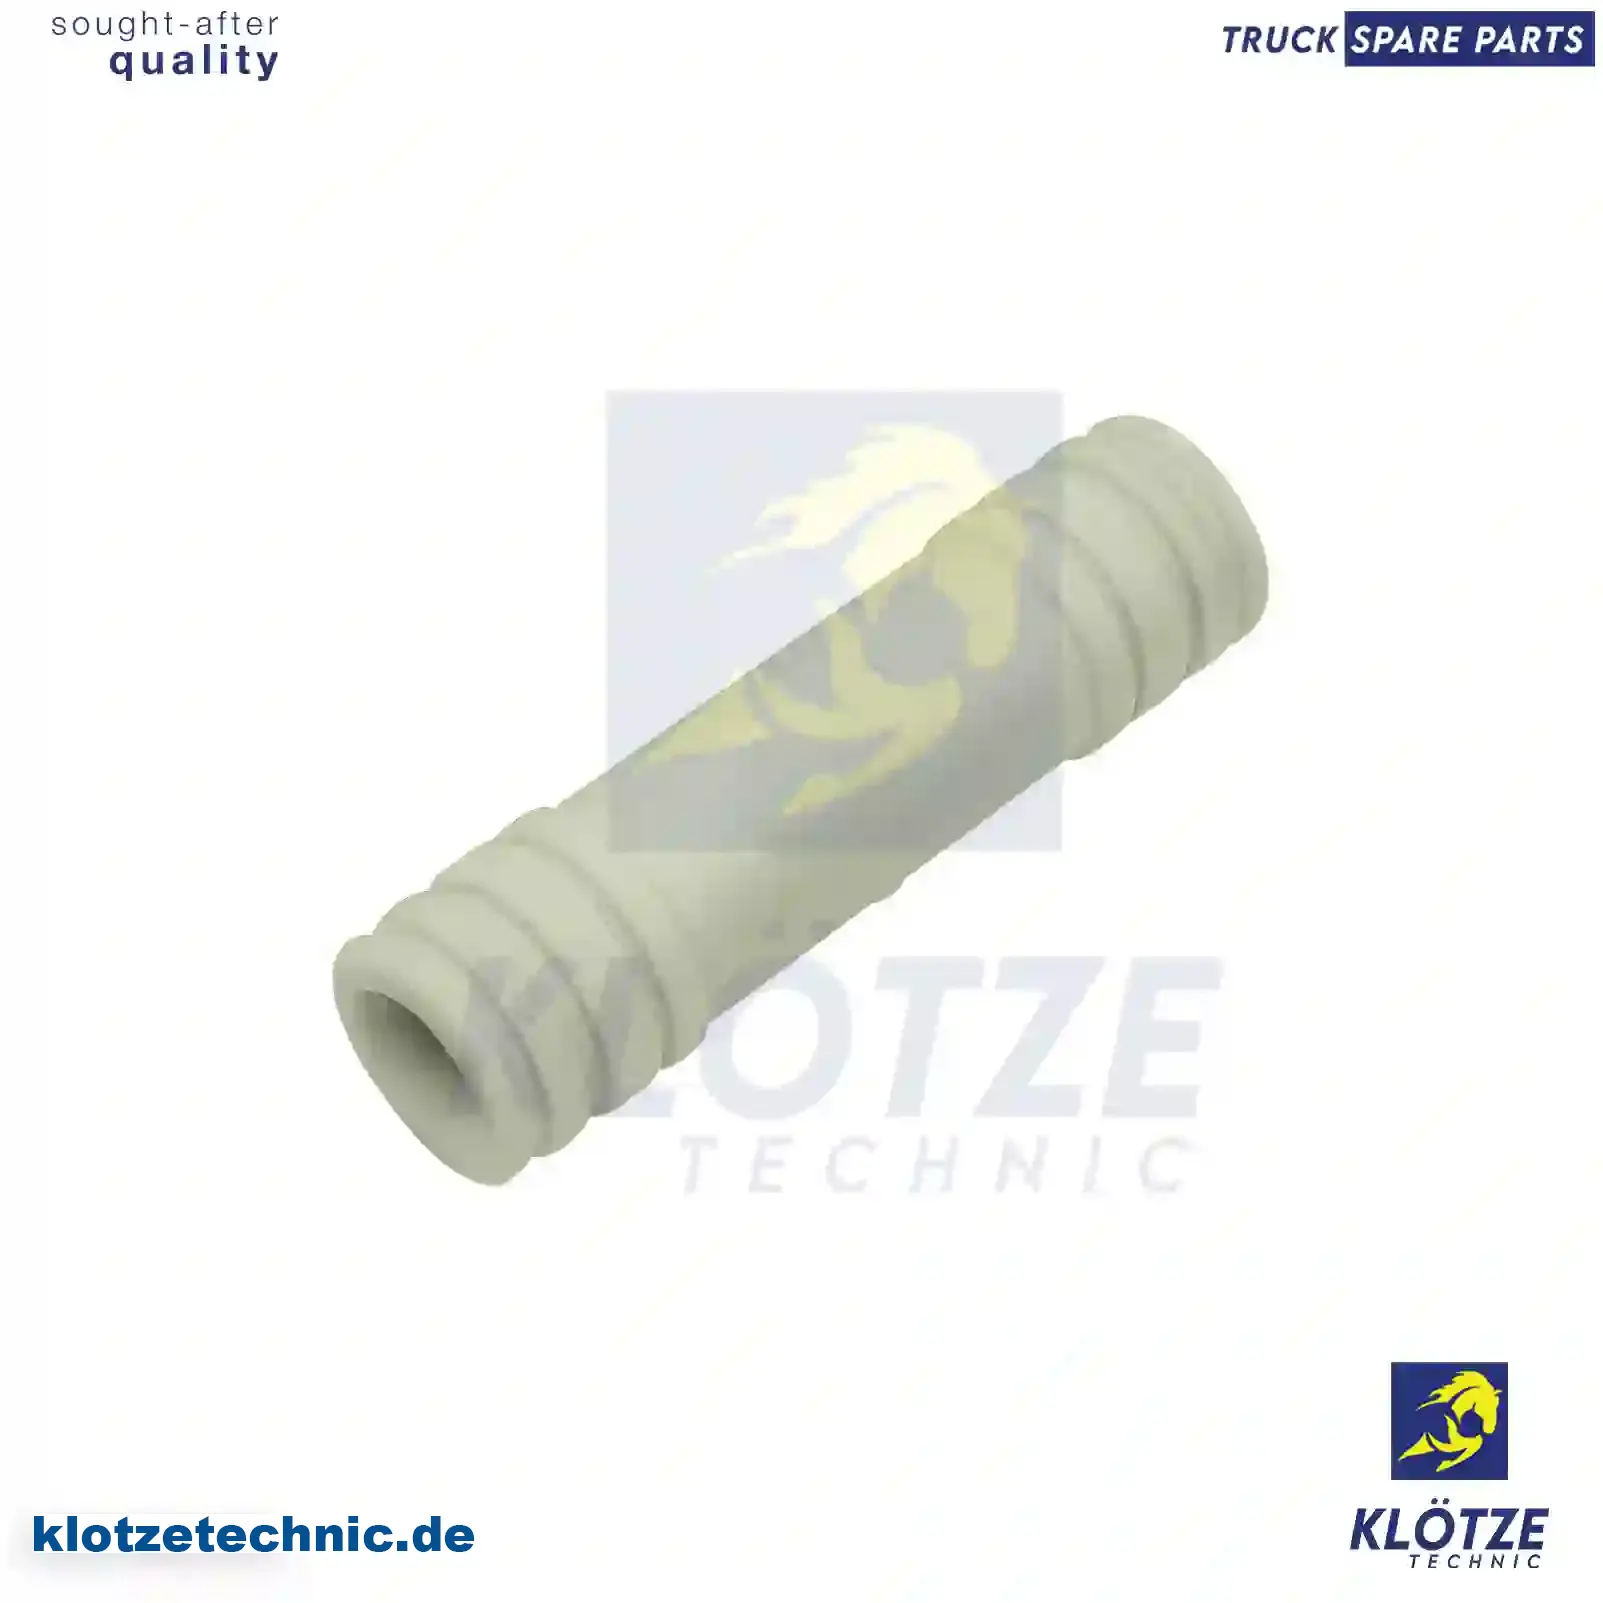 Cooling water pipe, 4697947, 04697947 || Klötze Technic